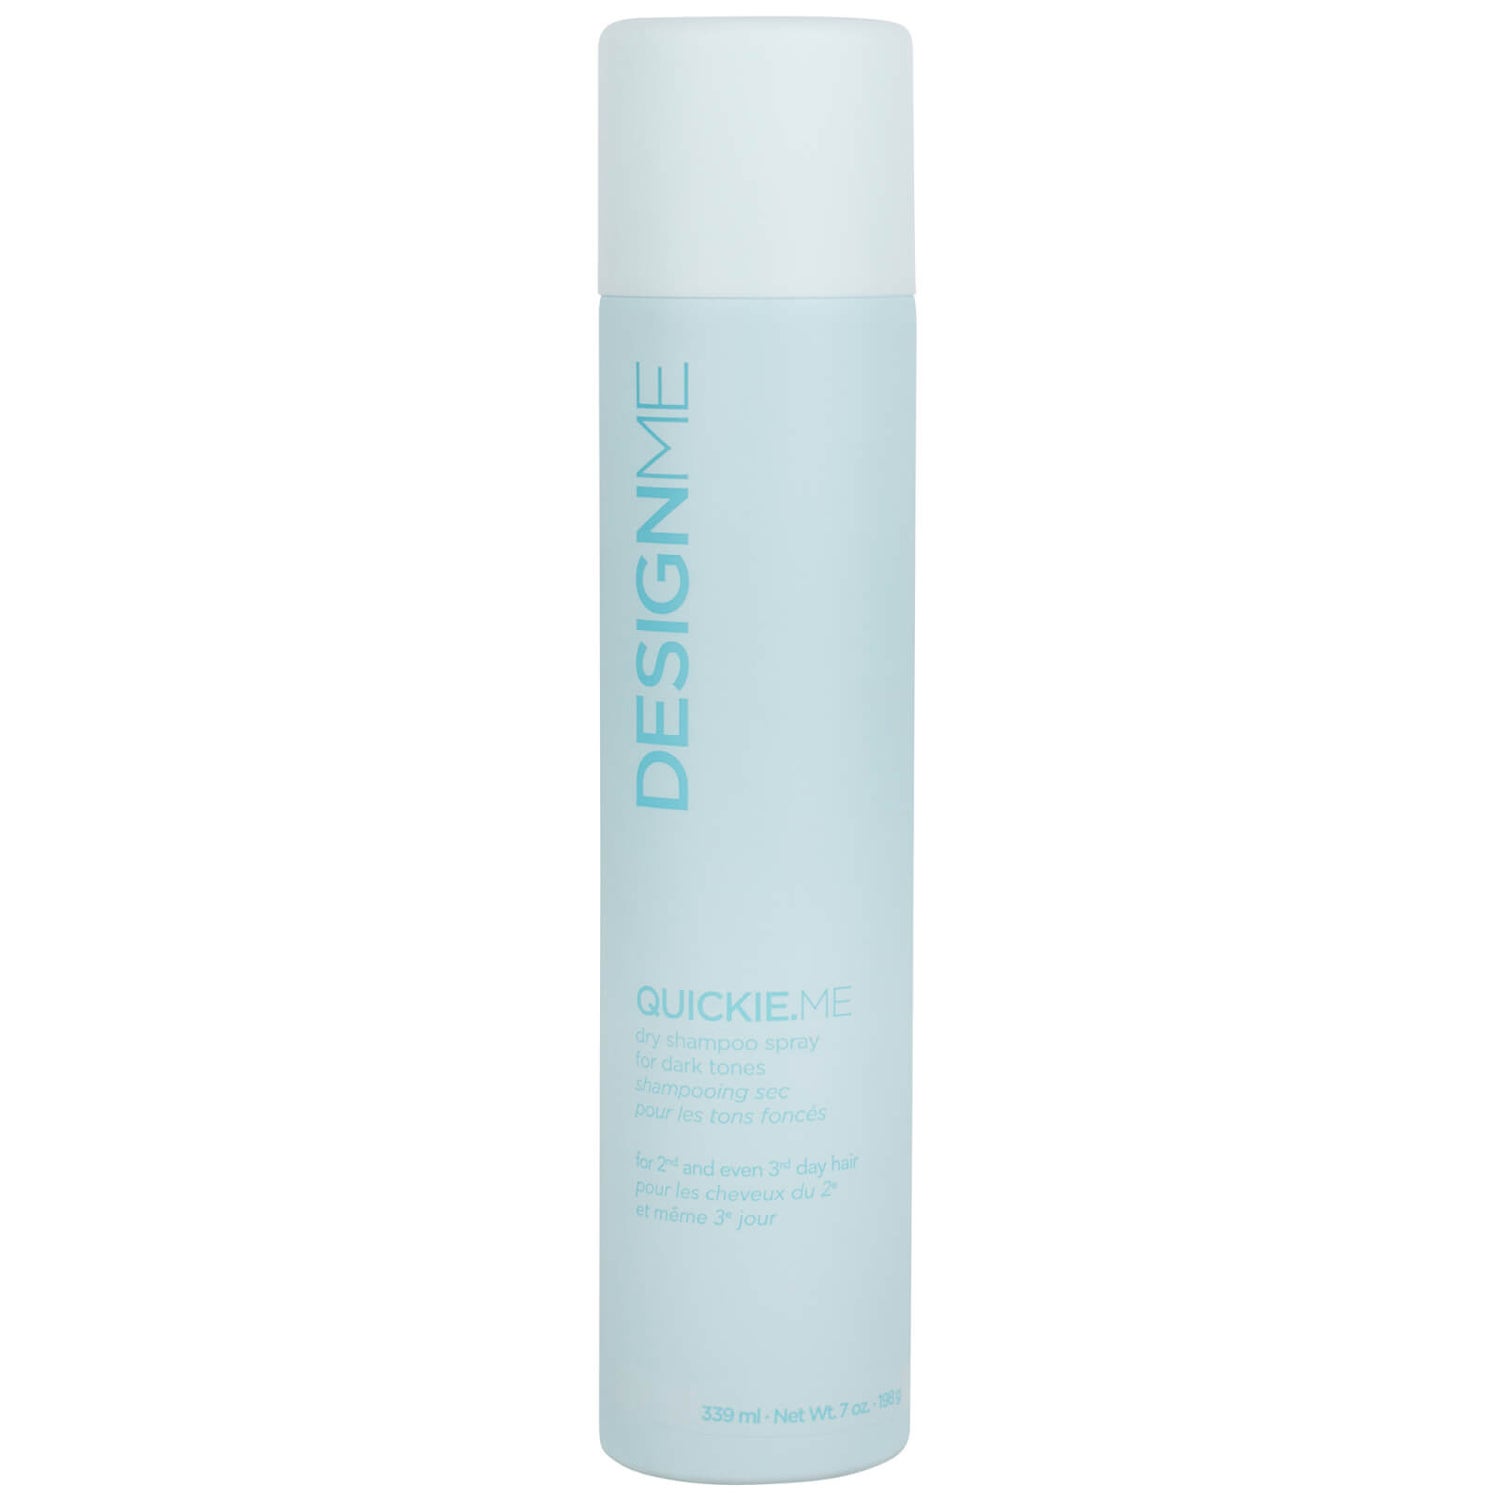 DESIGNME Quickie Me Dry Shampoo for Brunette and Darker Tones 339ml